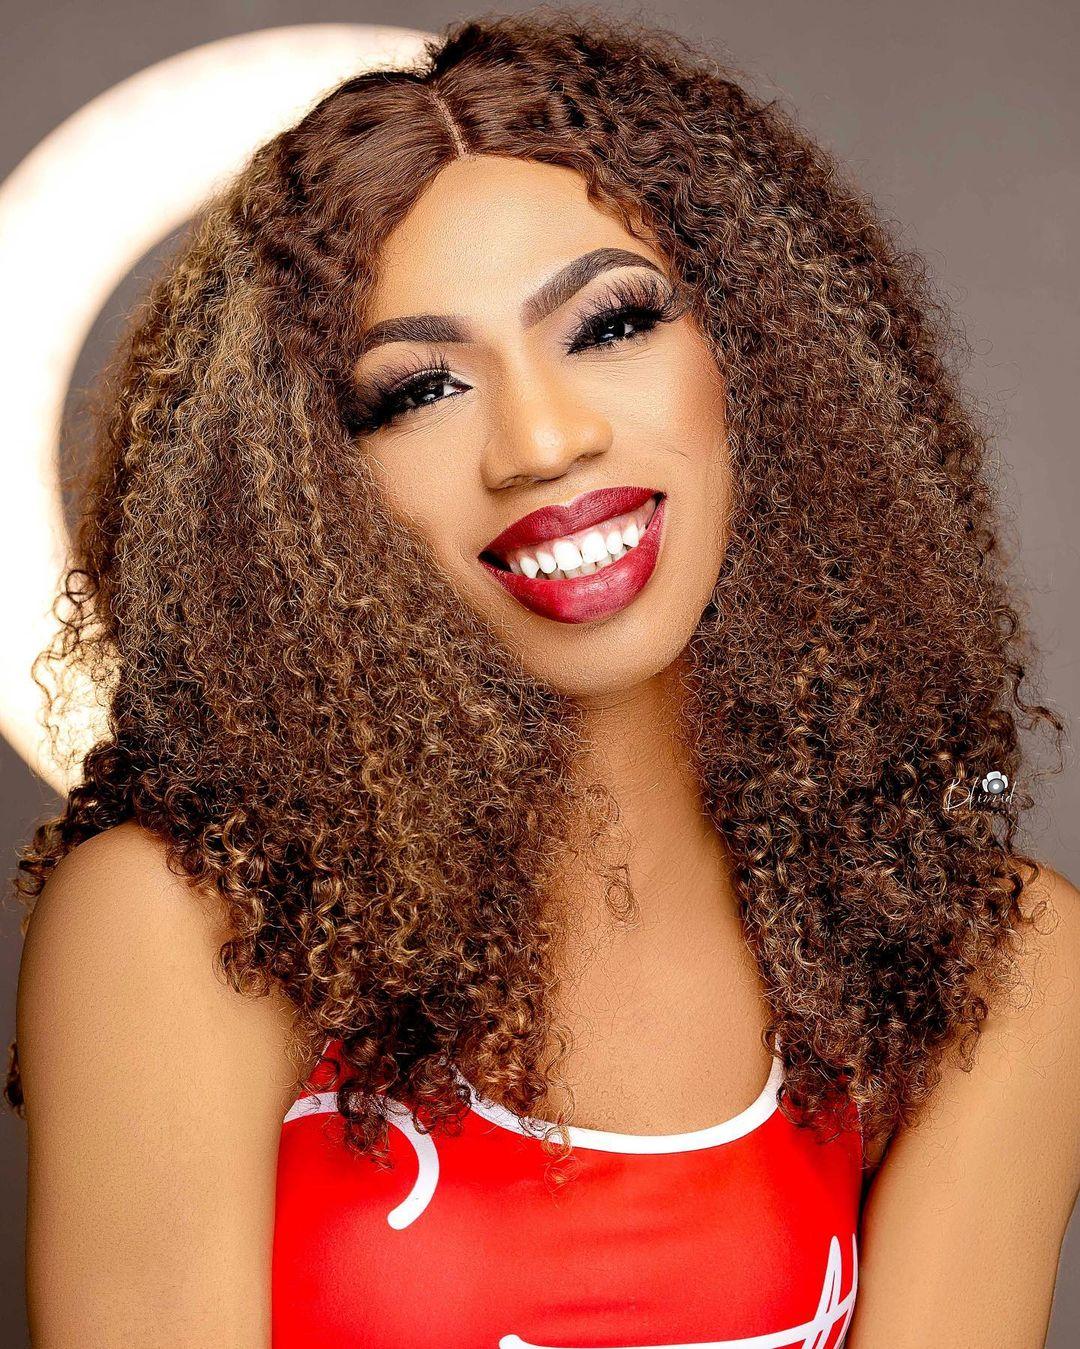 Being single is not easy, I need a man&quot; - Crossdresser, James Brown cries  out